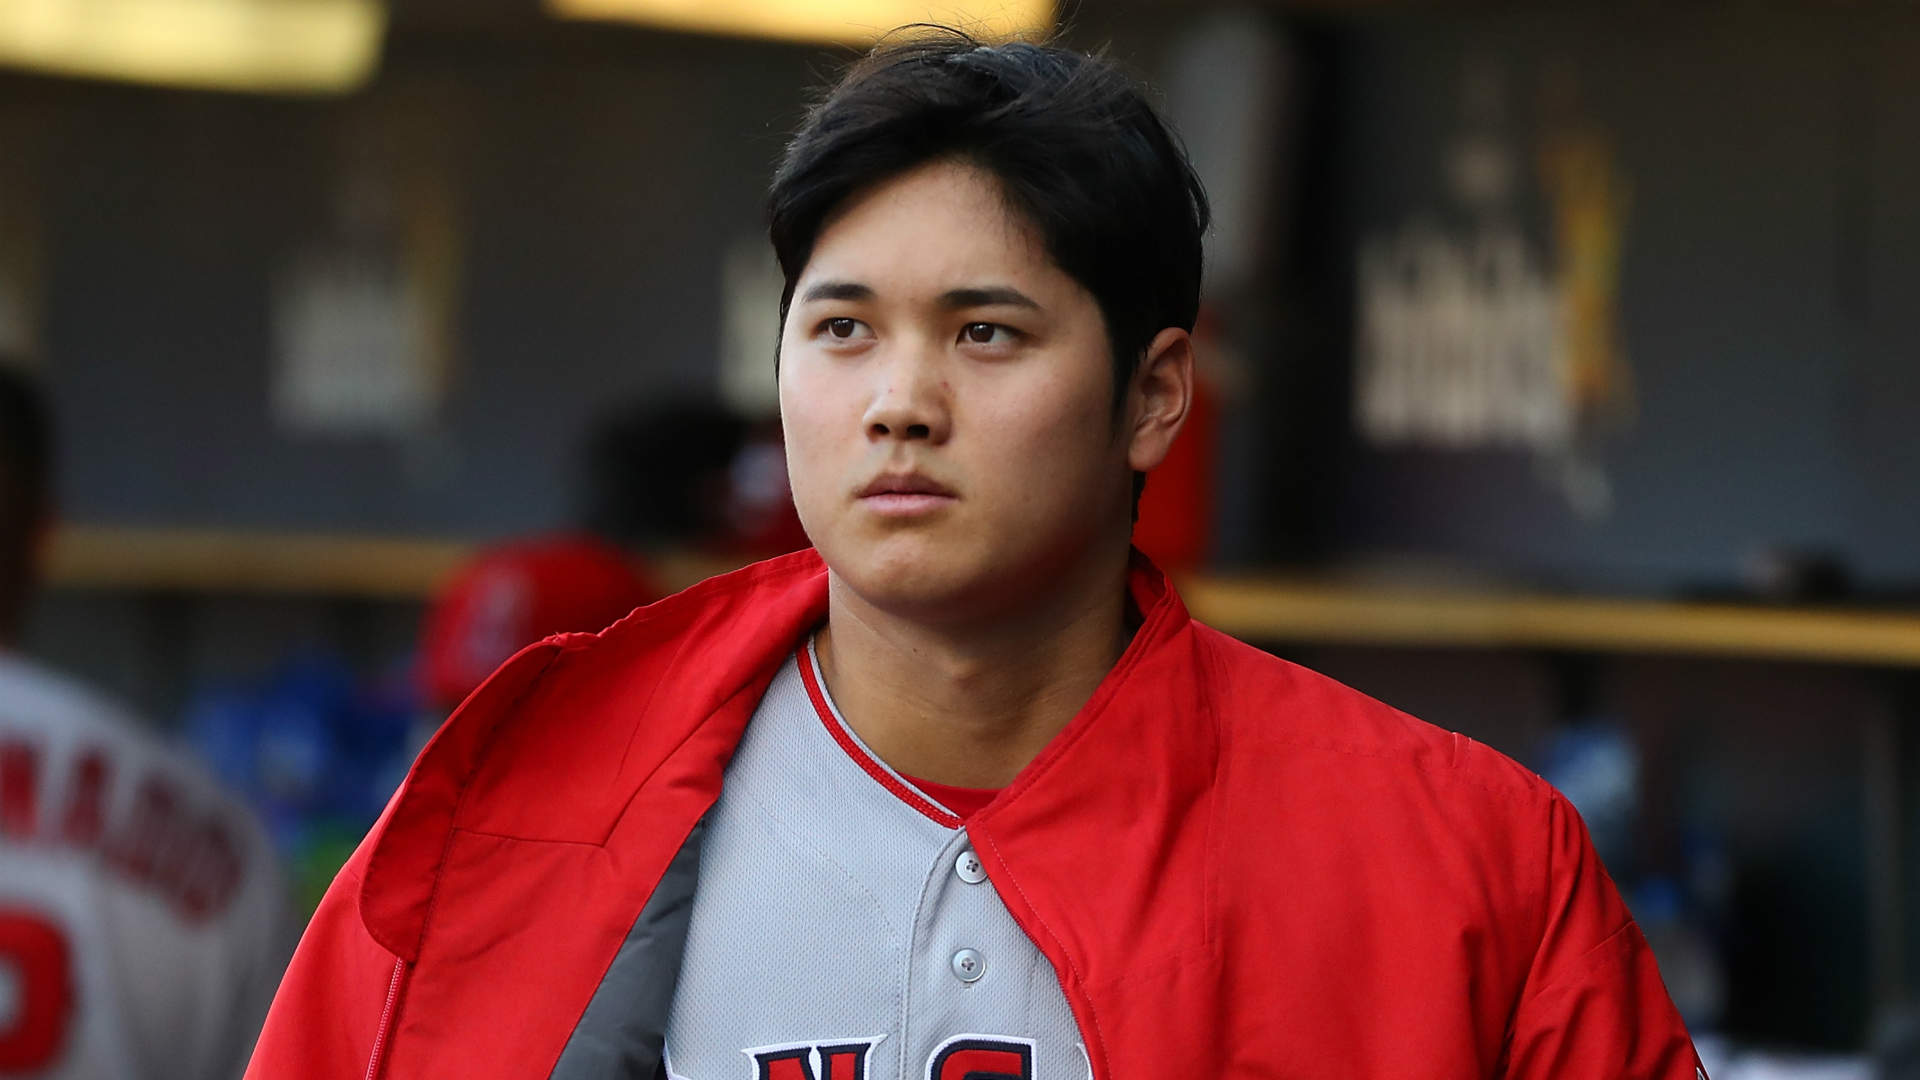 Shohei Ohtani could be out until 2020 after Tommy John surgery, report ...